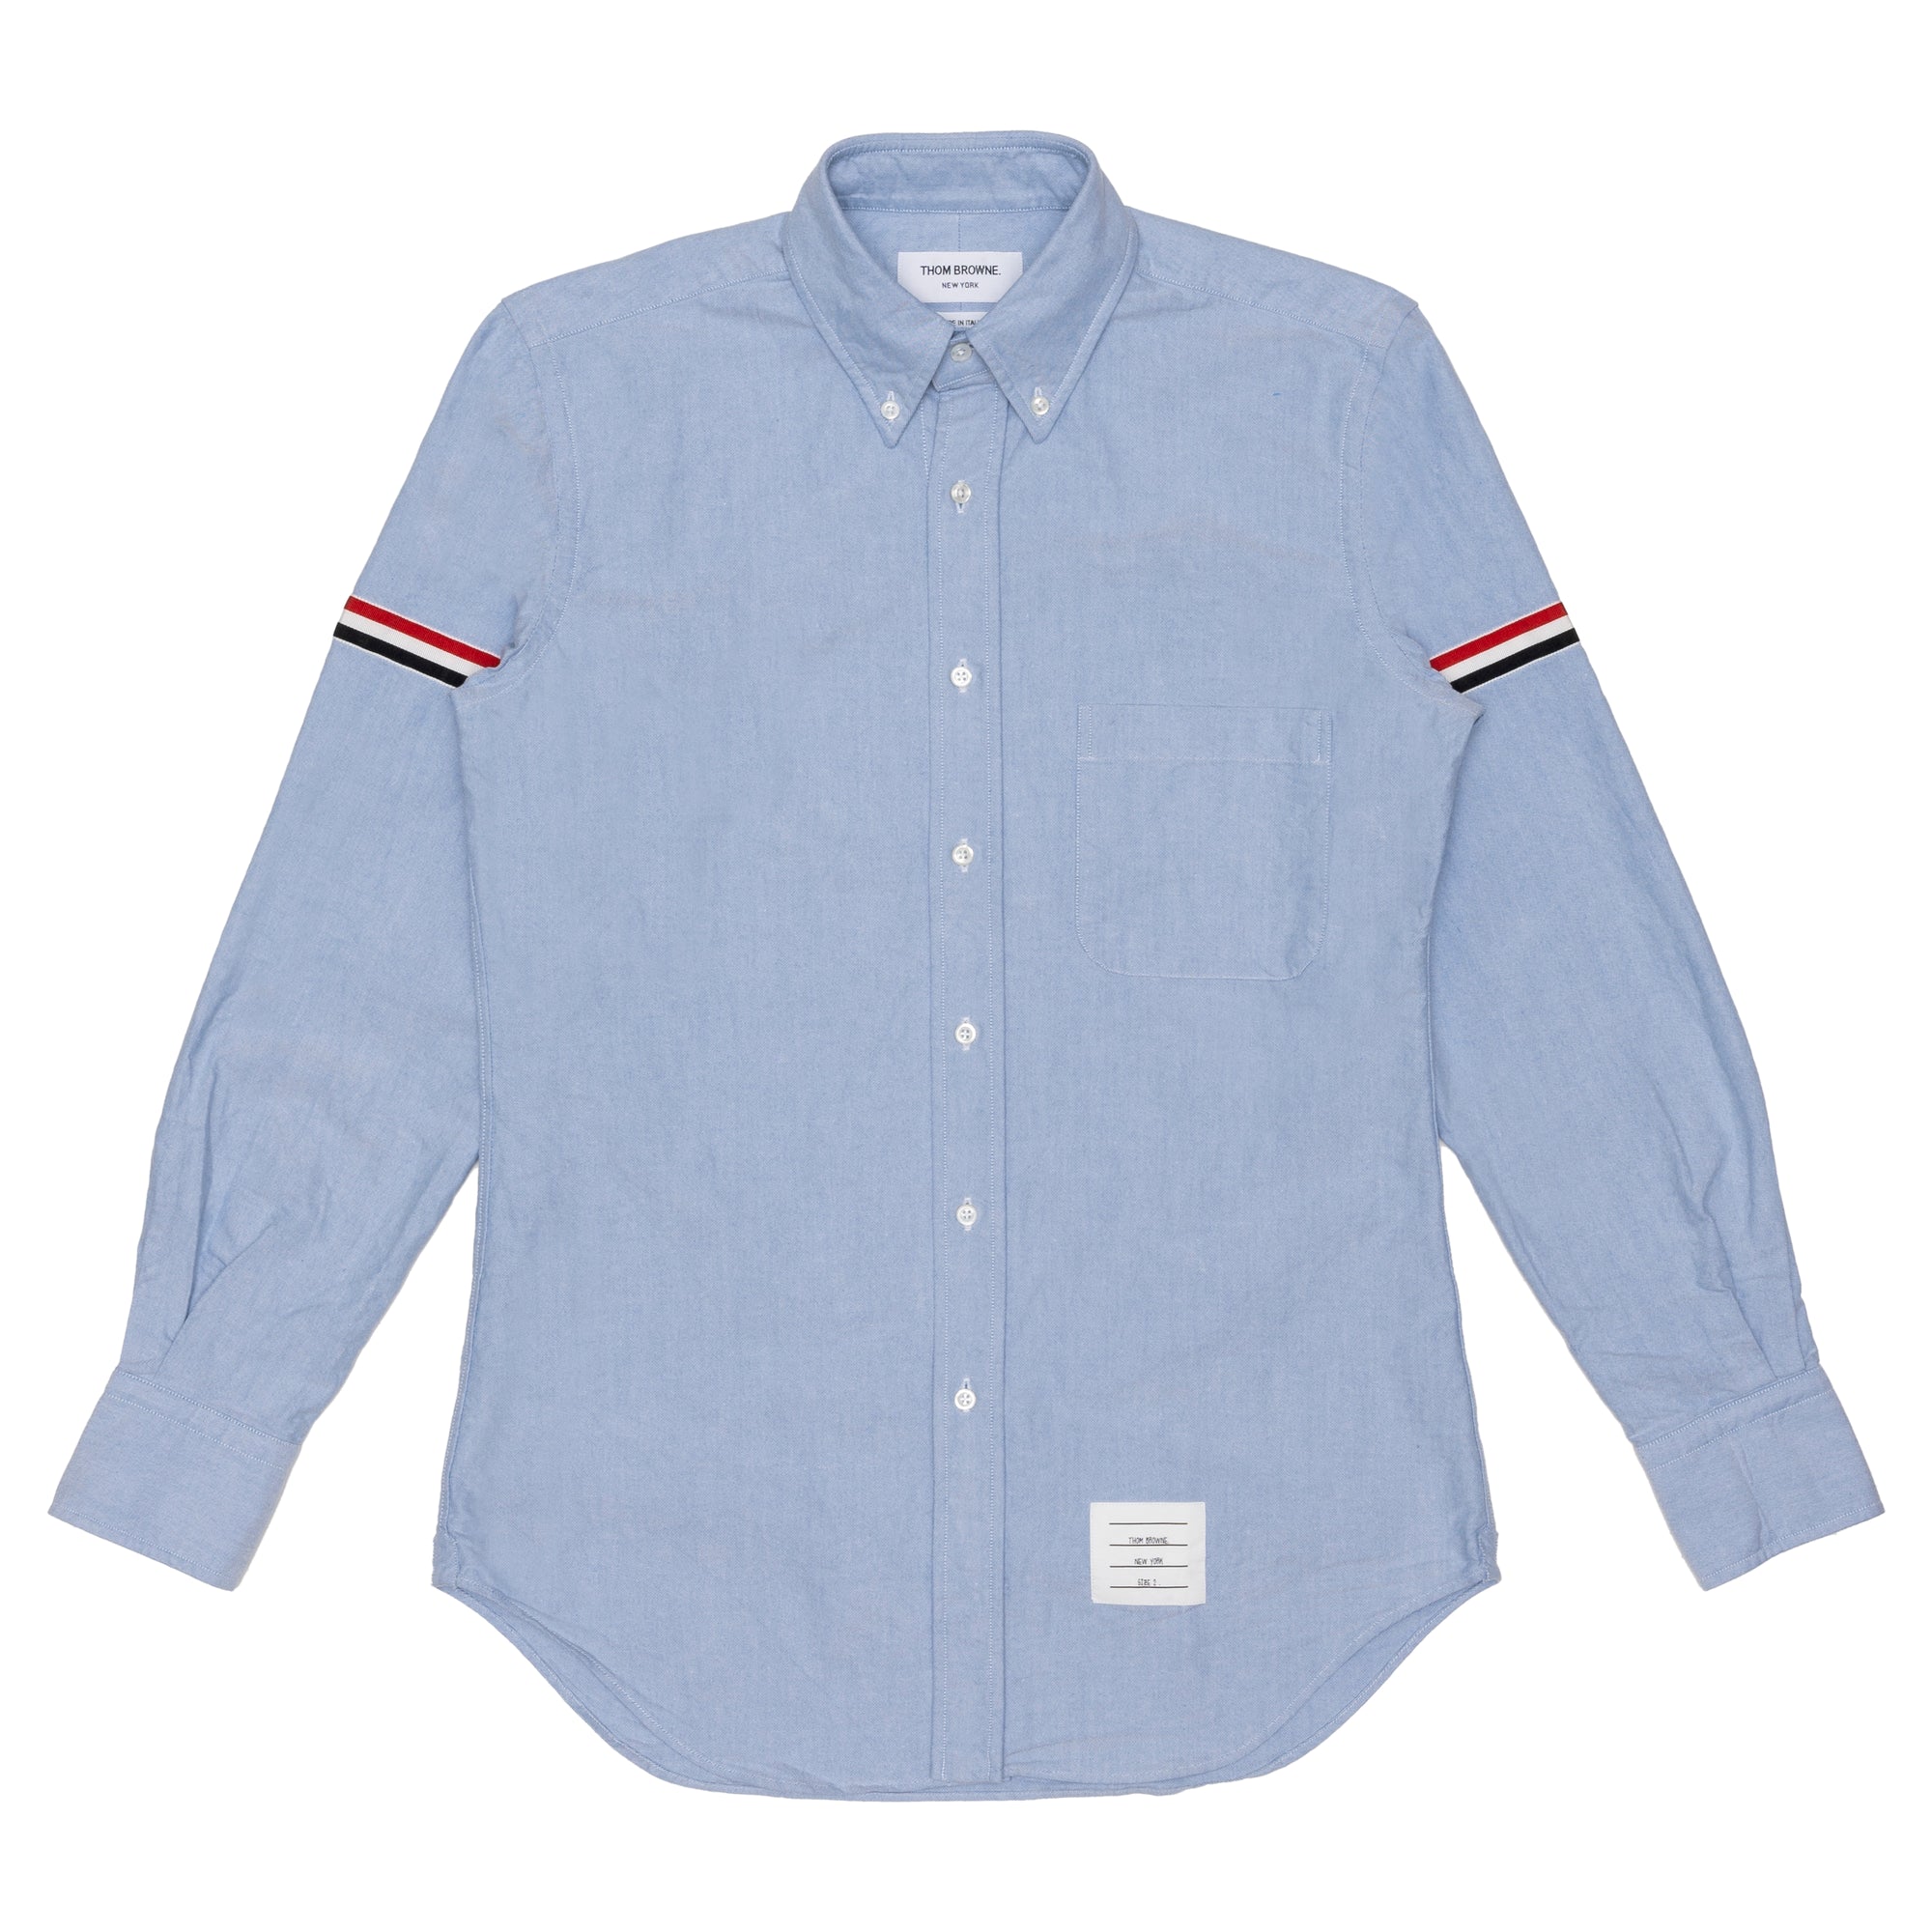 THOM BROWNE - MENS CLASSIC LONG SLEEVE BUTTON DOW - LIGHT BLUE - (MWL150E-06177) view 1